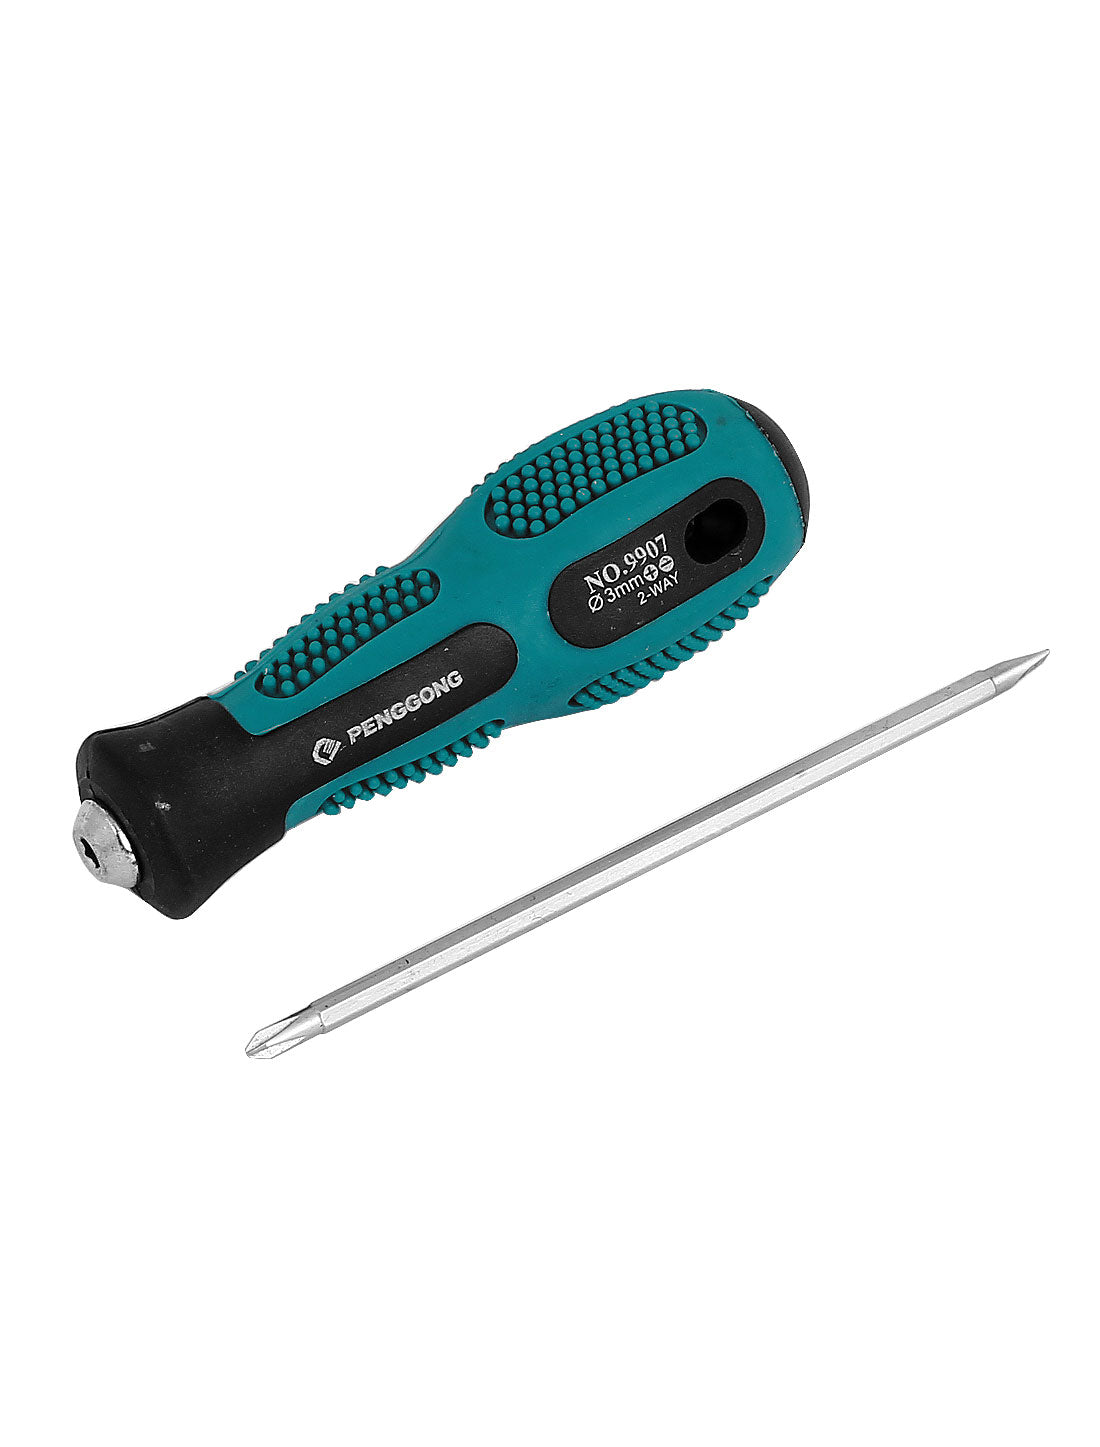 uxcell Uxcell 75mmx3mm Hex Shaft 3mm Magnetic Tip Slotted Phillips Screwdriver